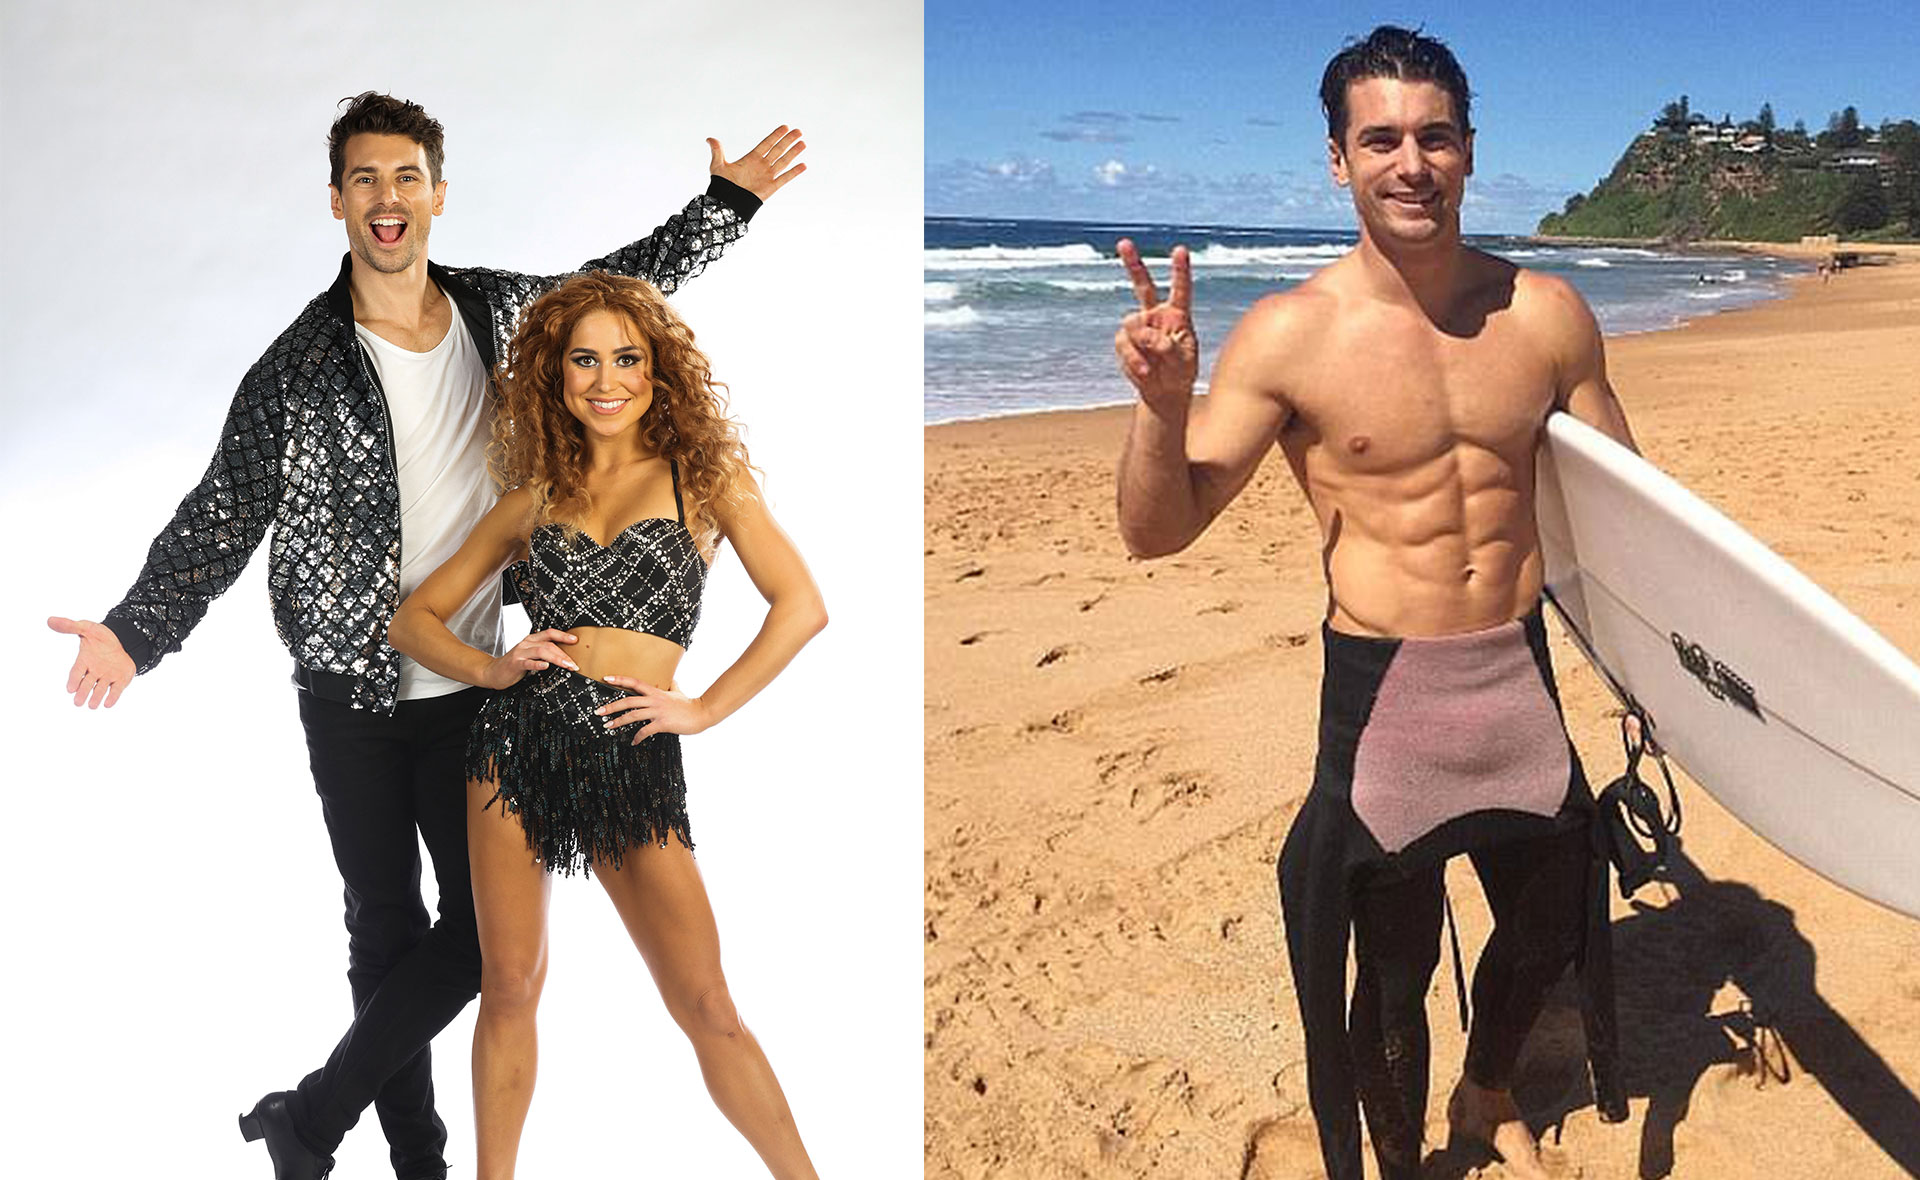 EXCLUSIVE: You won’t believe Matty J’s Dancing With The Stars body transformation